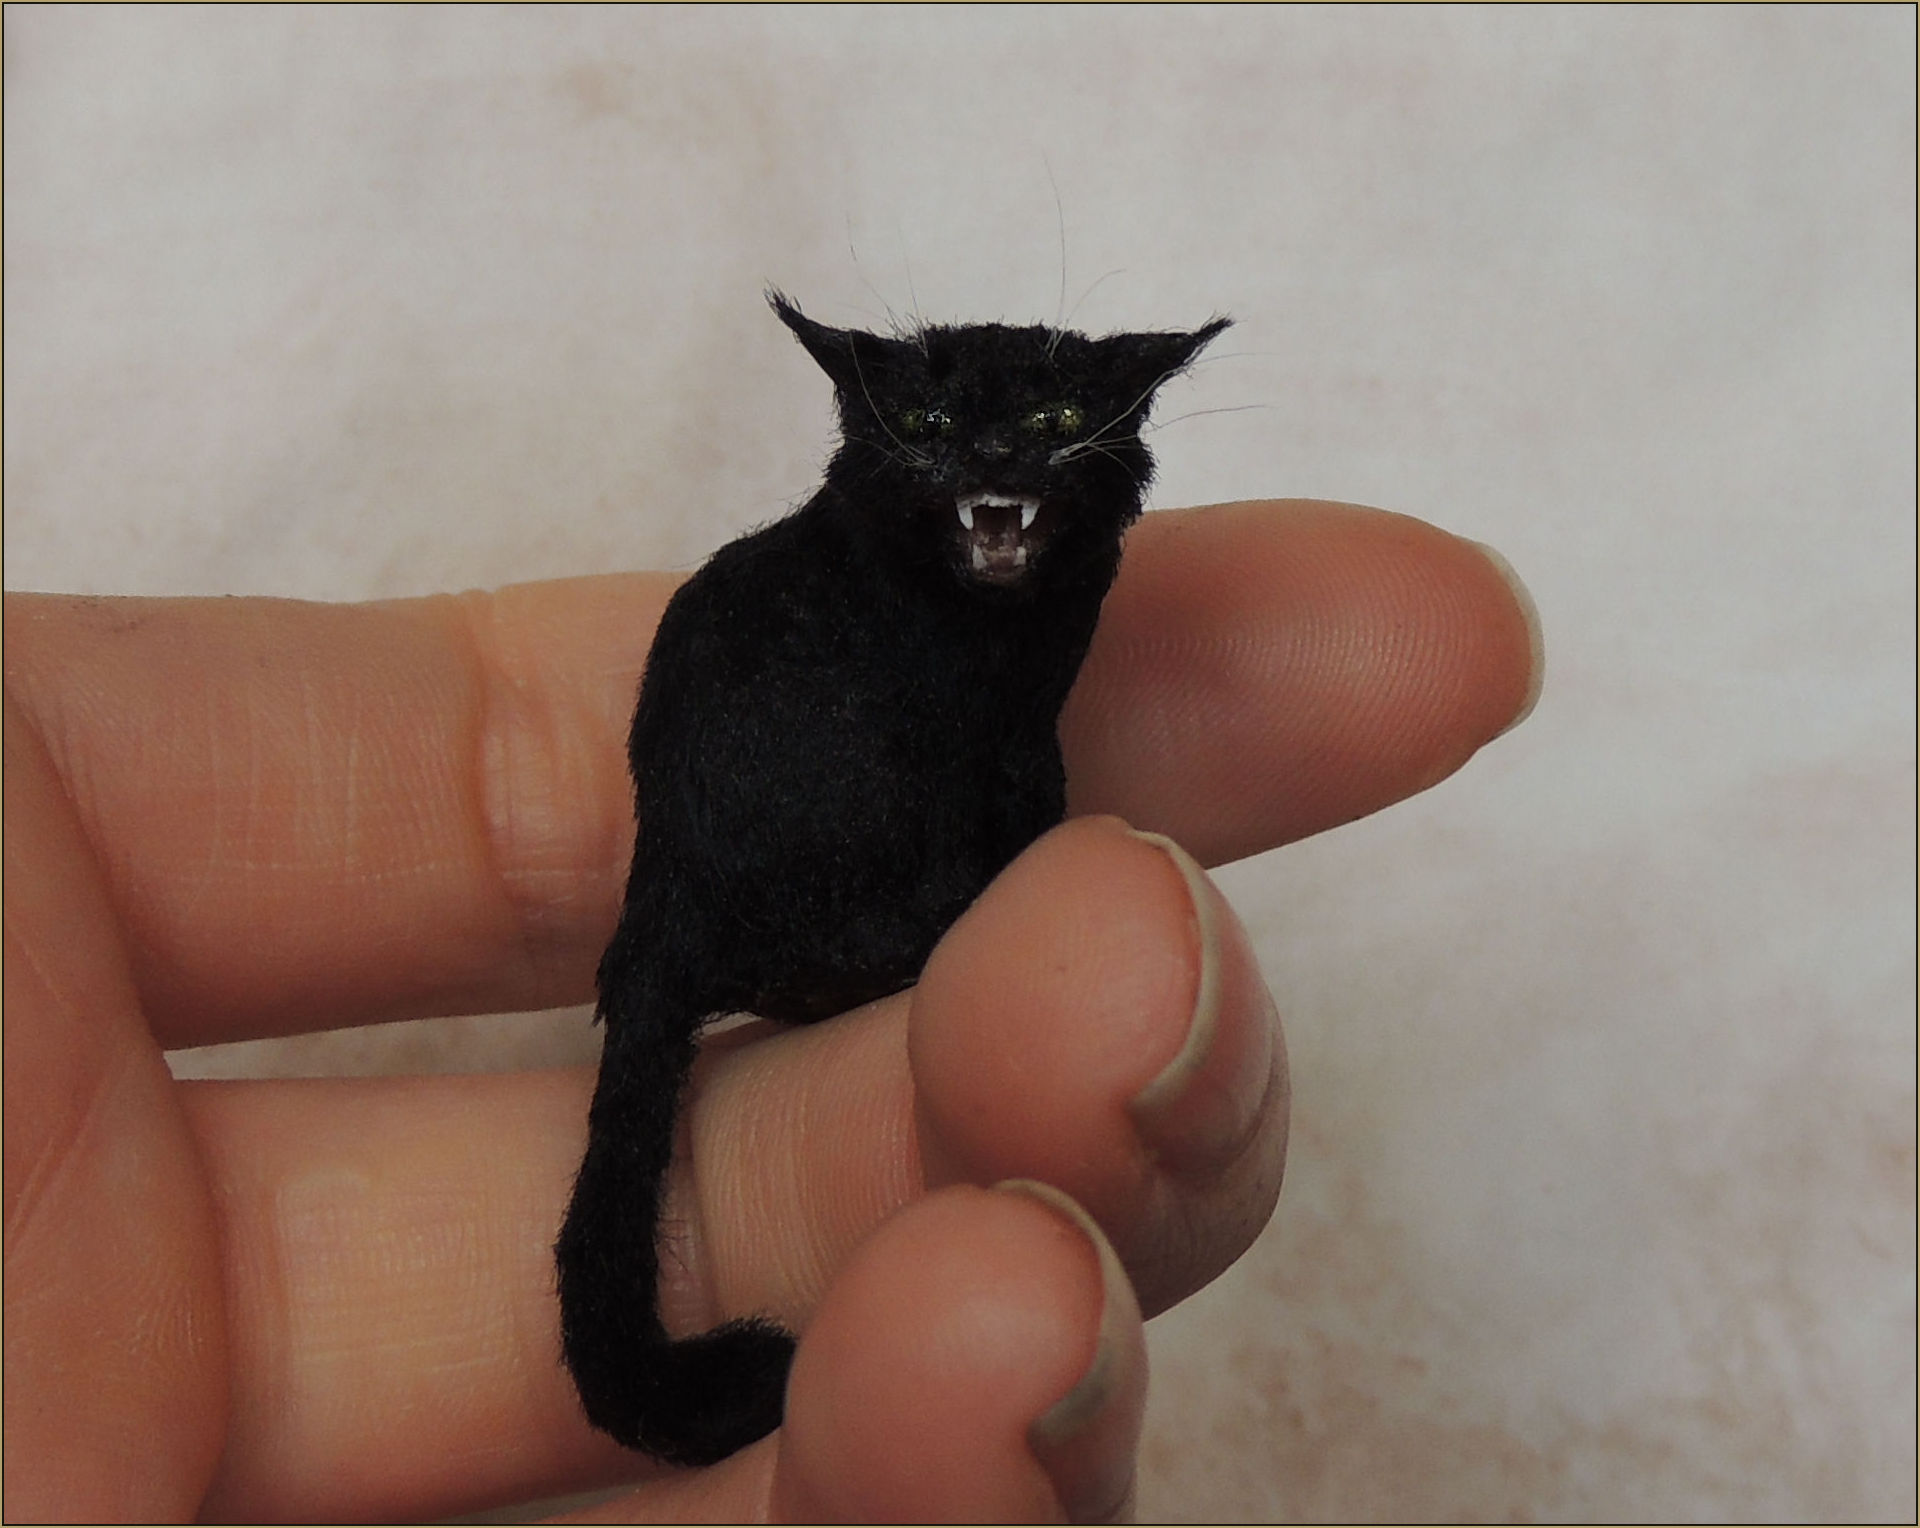     Scale: 1:12th    Medium: Polymer clay mixed media with a coat made of black viscose yarn. The eyes are hand painted.    Dimensions: 2.8 cm from base to the top of the head. 4.8cm Including the length of the tail.    Year: 2015    